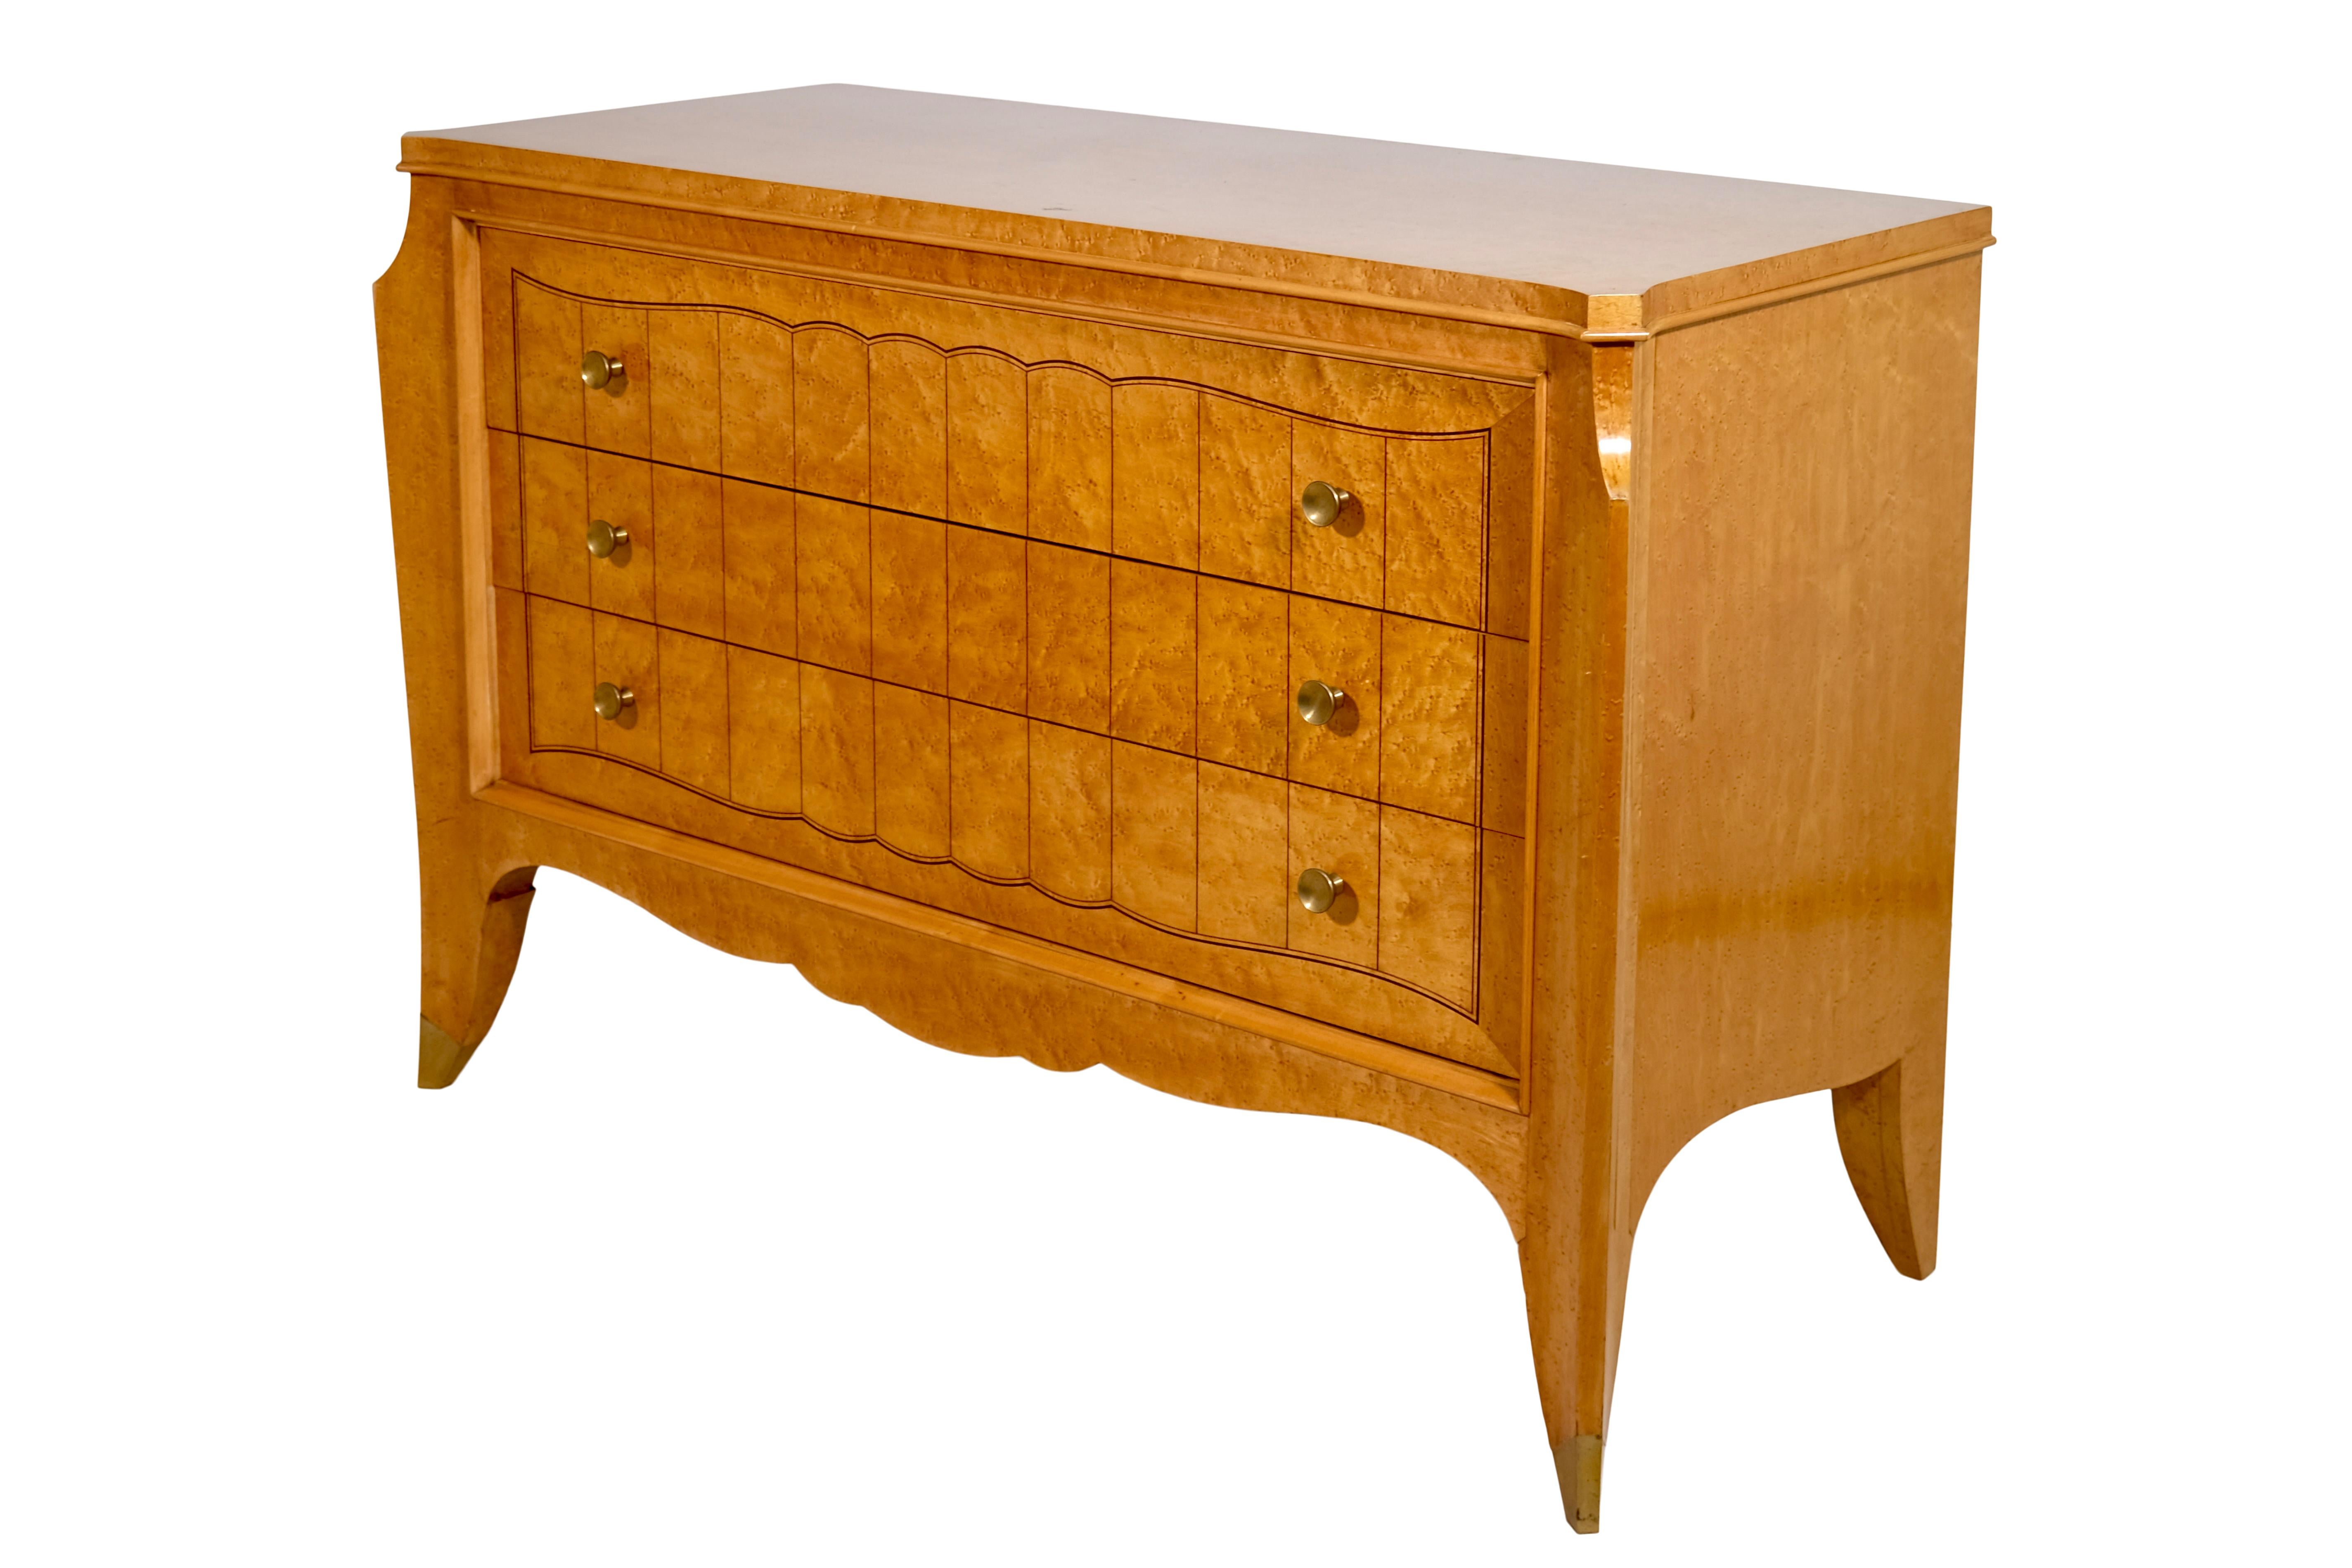 Polished French 1930s Jean Pascaud Art Deco Chest Of Drawers in Birdseye Maple For Sale